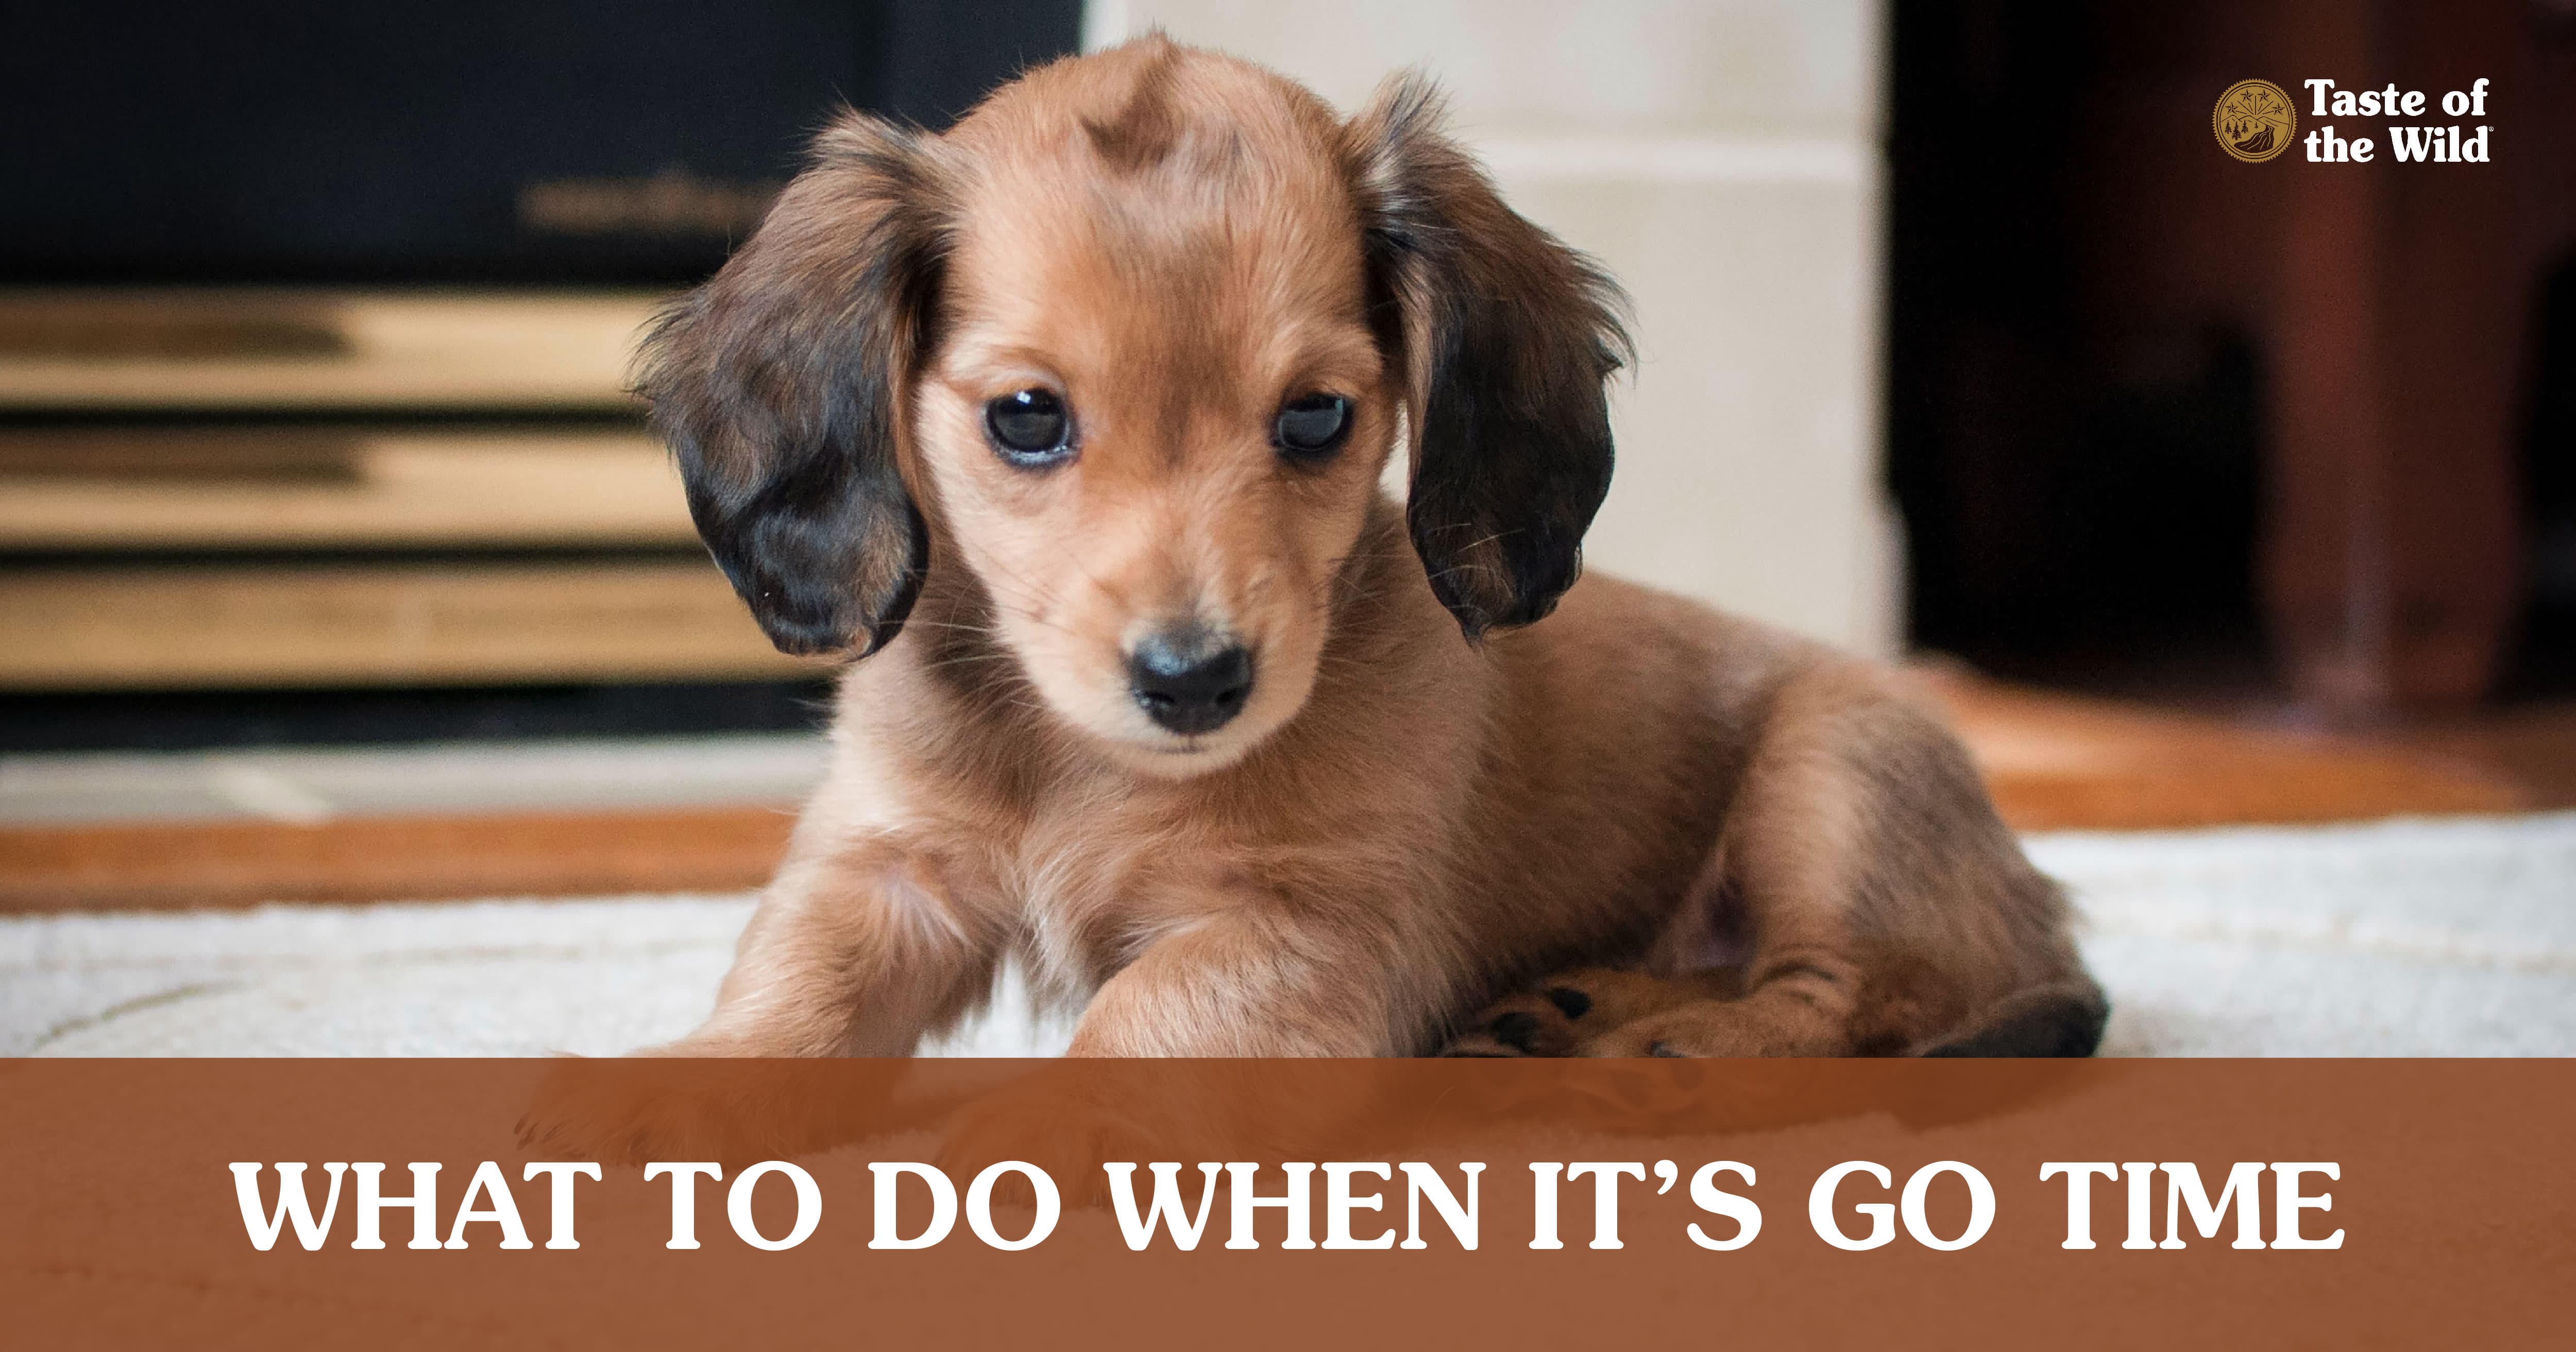 It's Go Time: Cleaning Up When Potty Training Your Puppy | Taste of the Wild